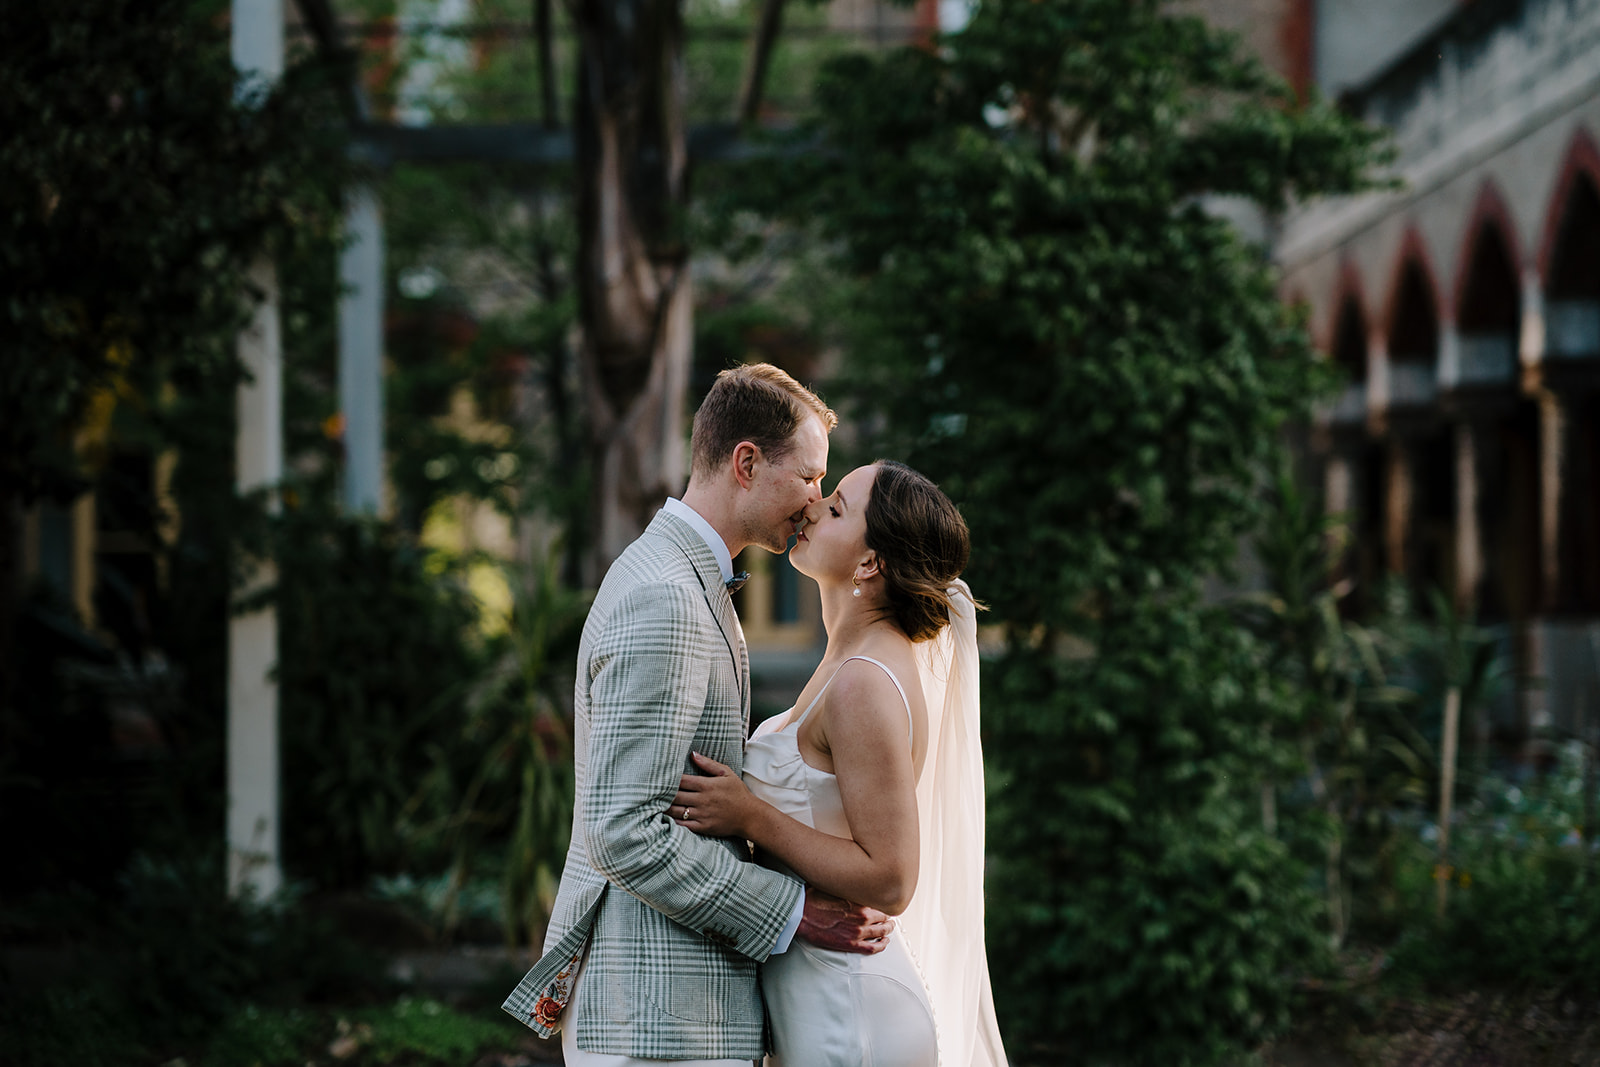 Documentary wedding photographer in Melbourne captures bride and groom sharing a kiss together in Abbotsford Convent